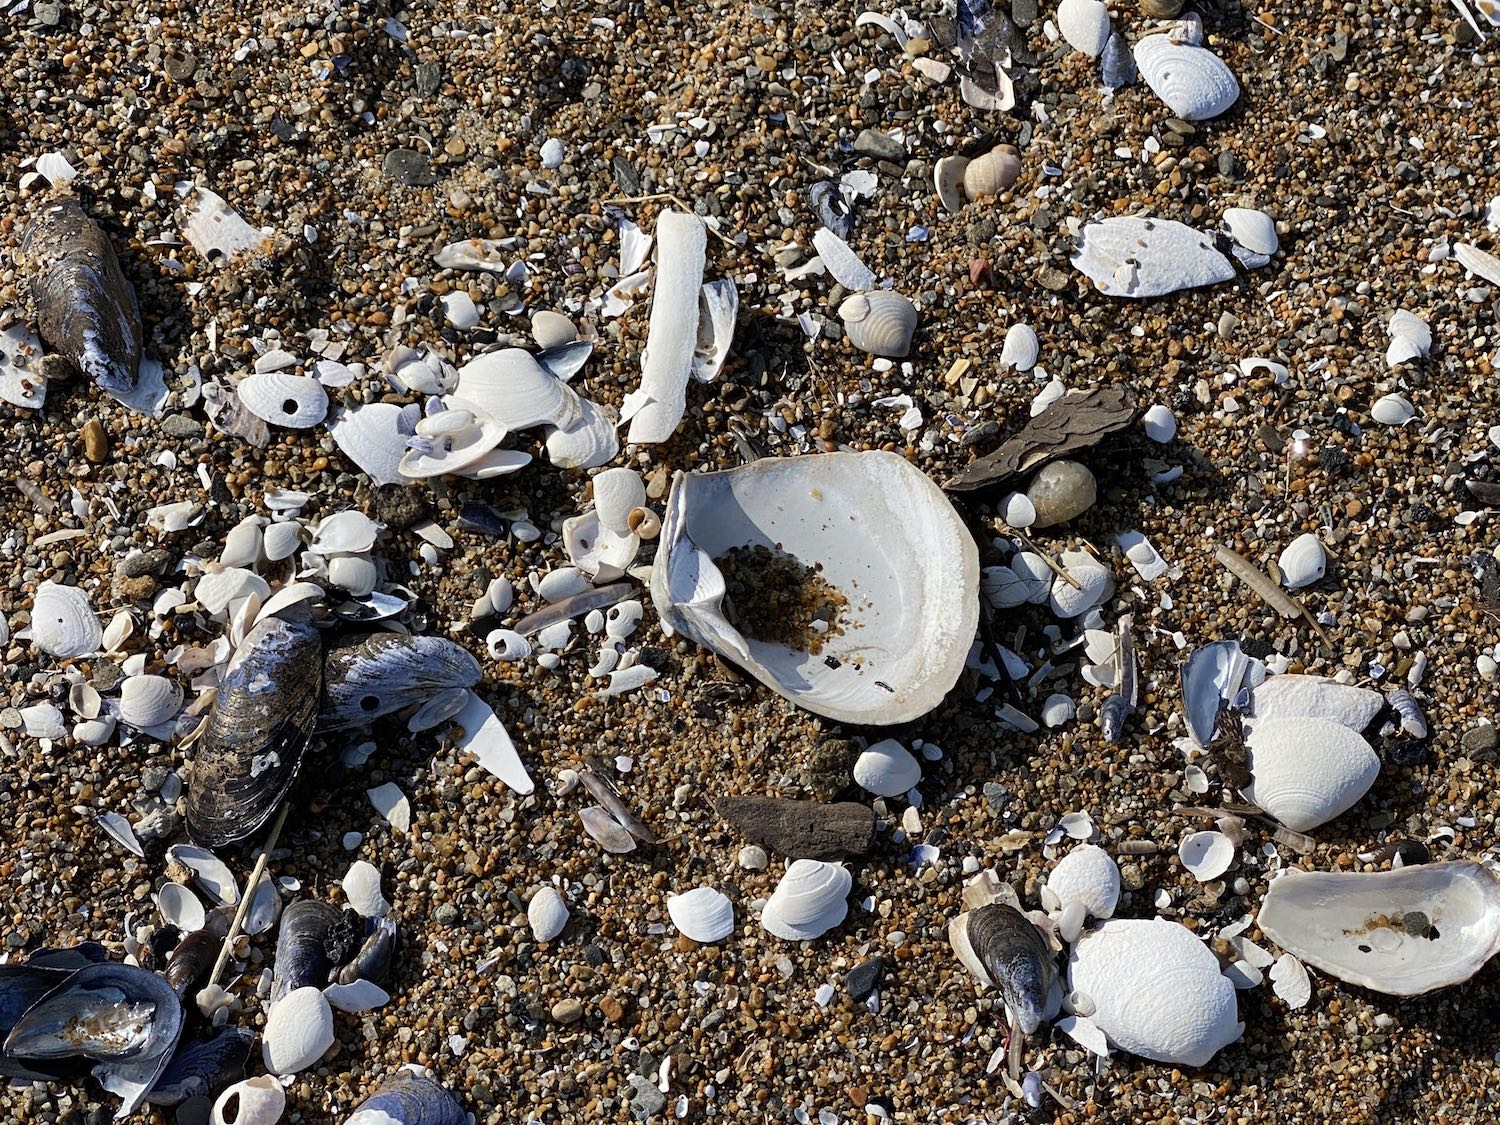 It's the weekend! Number 285, Seashells on the Beach